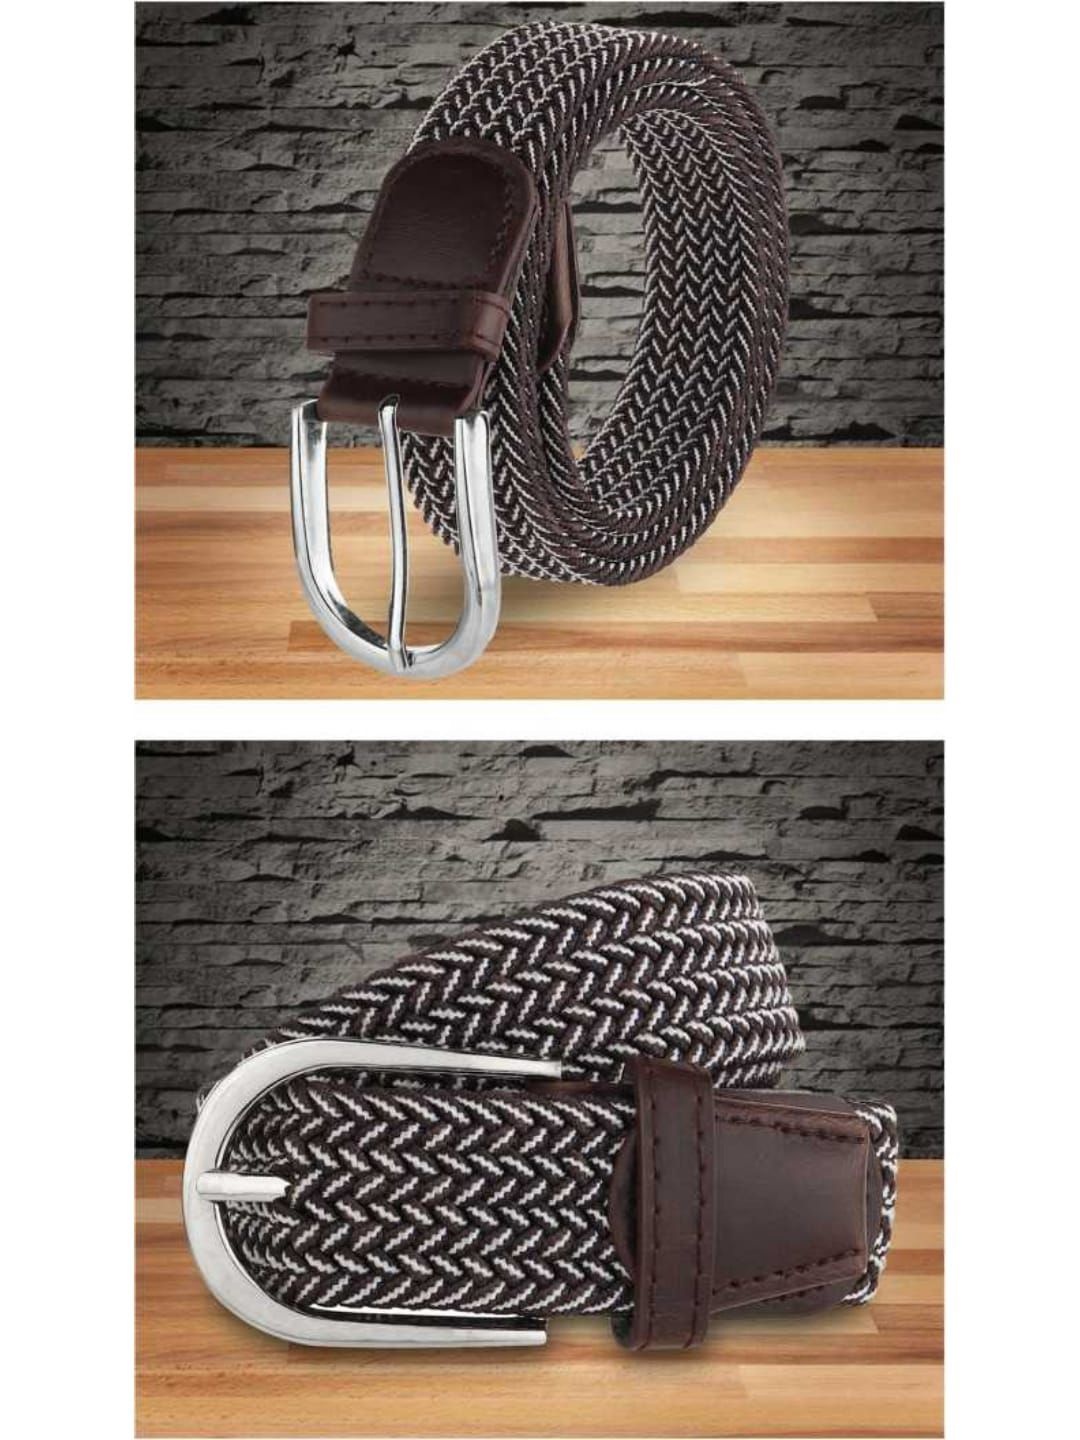 Elite Crafts Elastic Braided Woven Canvas Belts Price in India